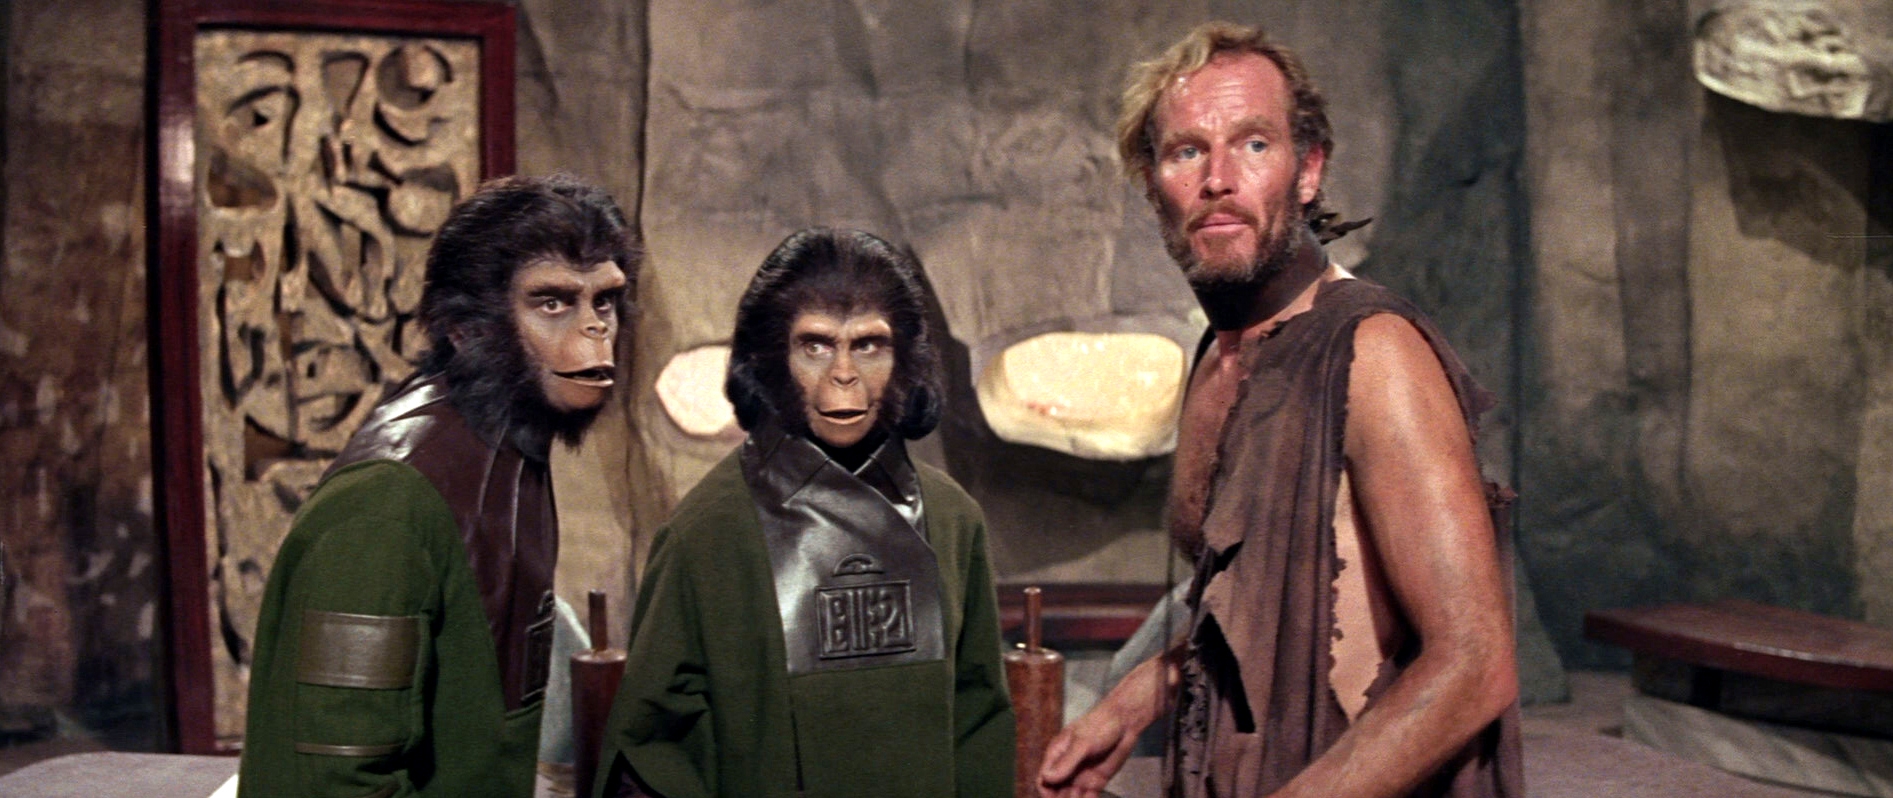 Planet of the Apes Cast 1968